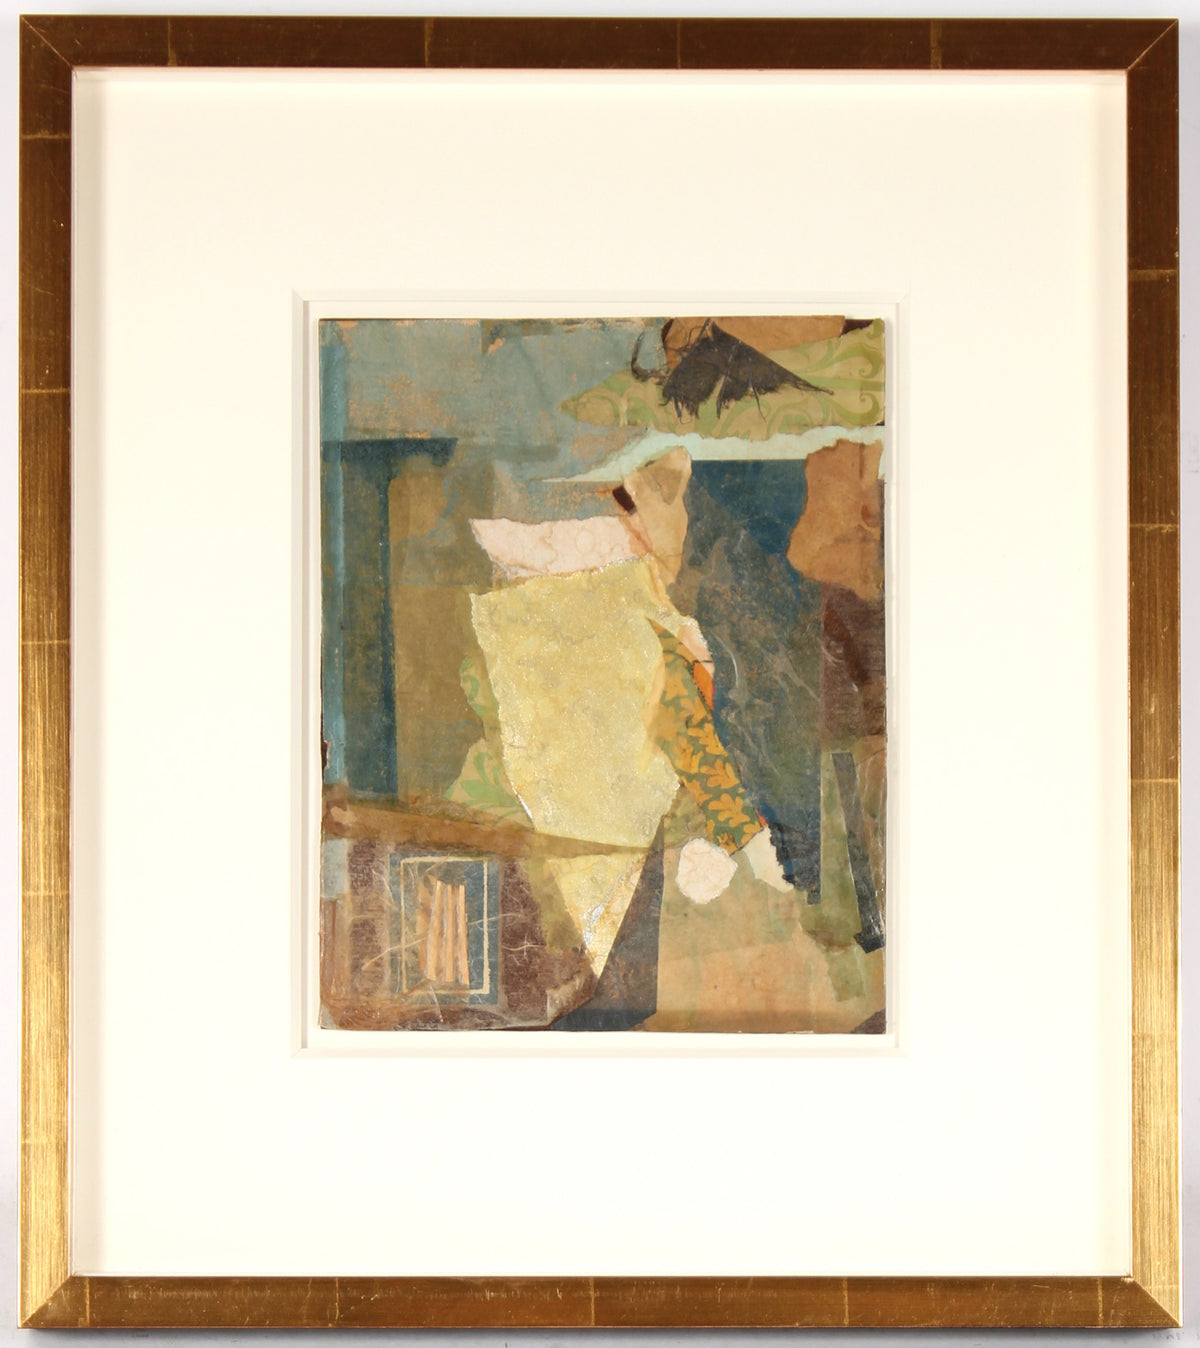 Abstracted Collage in Warm Colors&lt;br&gt;Mid Century Collage&lt;br&gt;&lt;br&gt;#81062